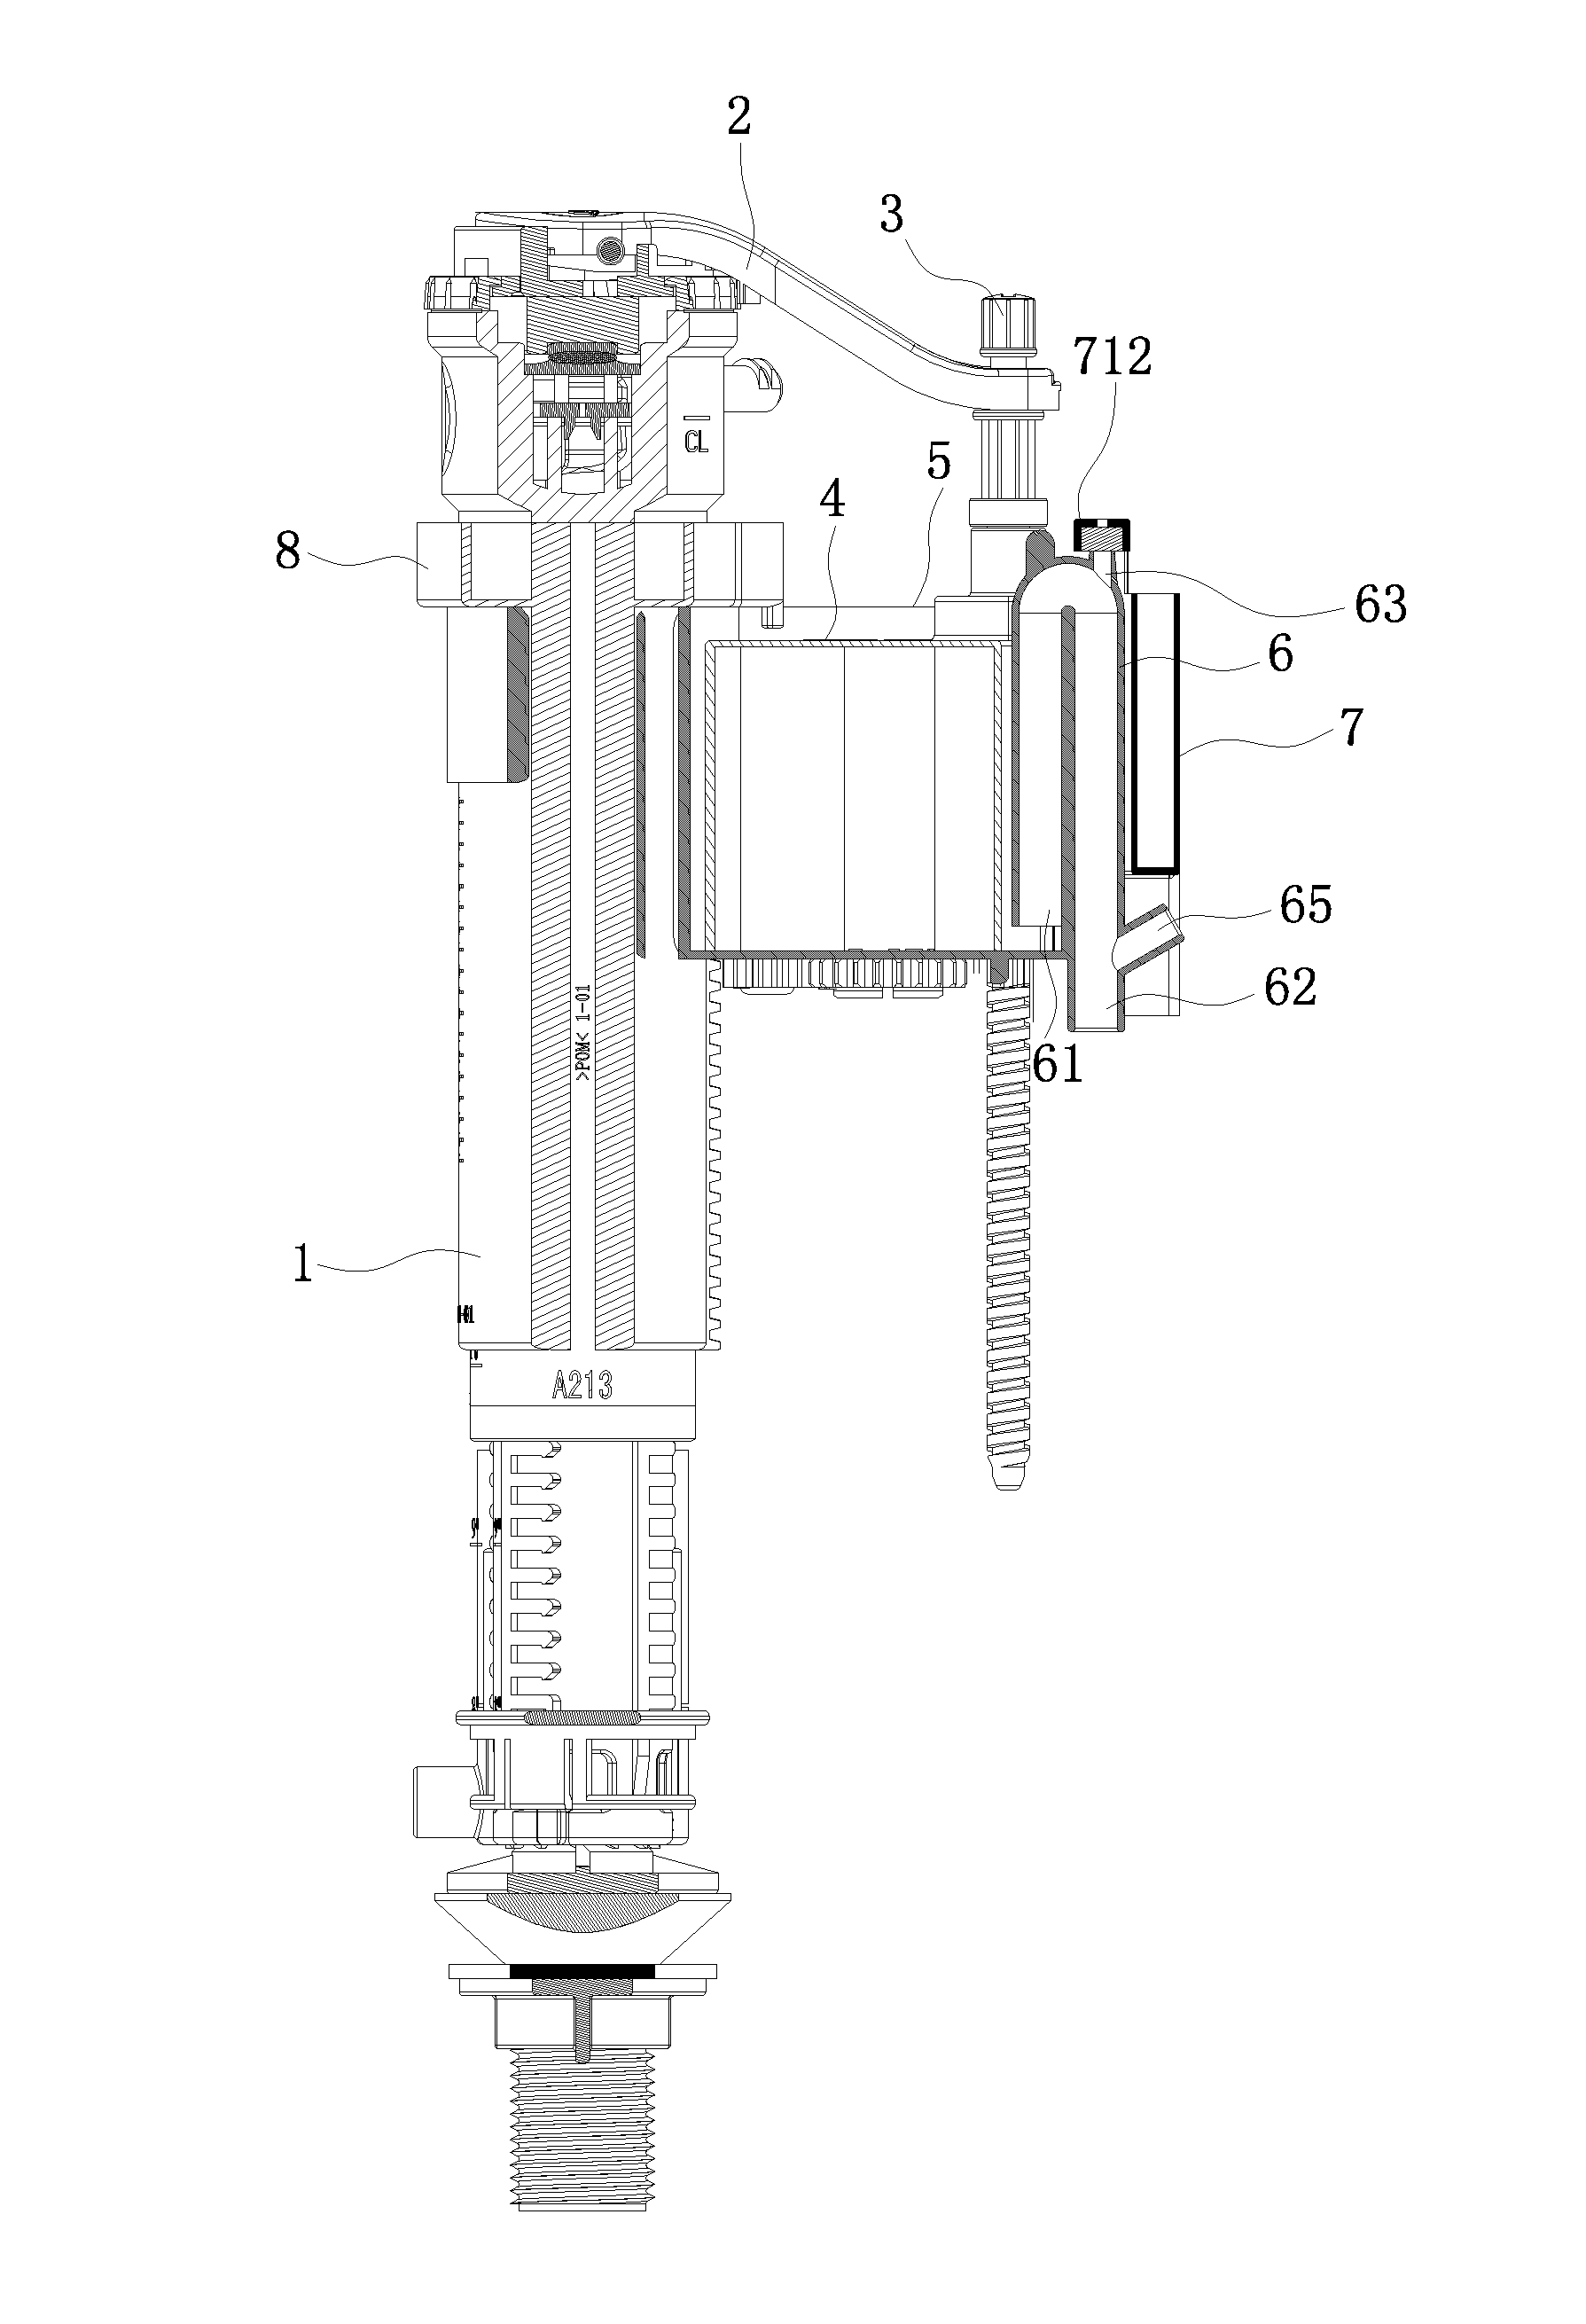 Minor water leak prevention apparatus for water inlet valve